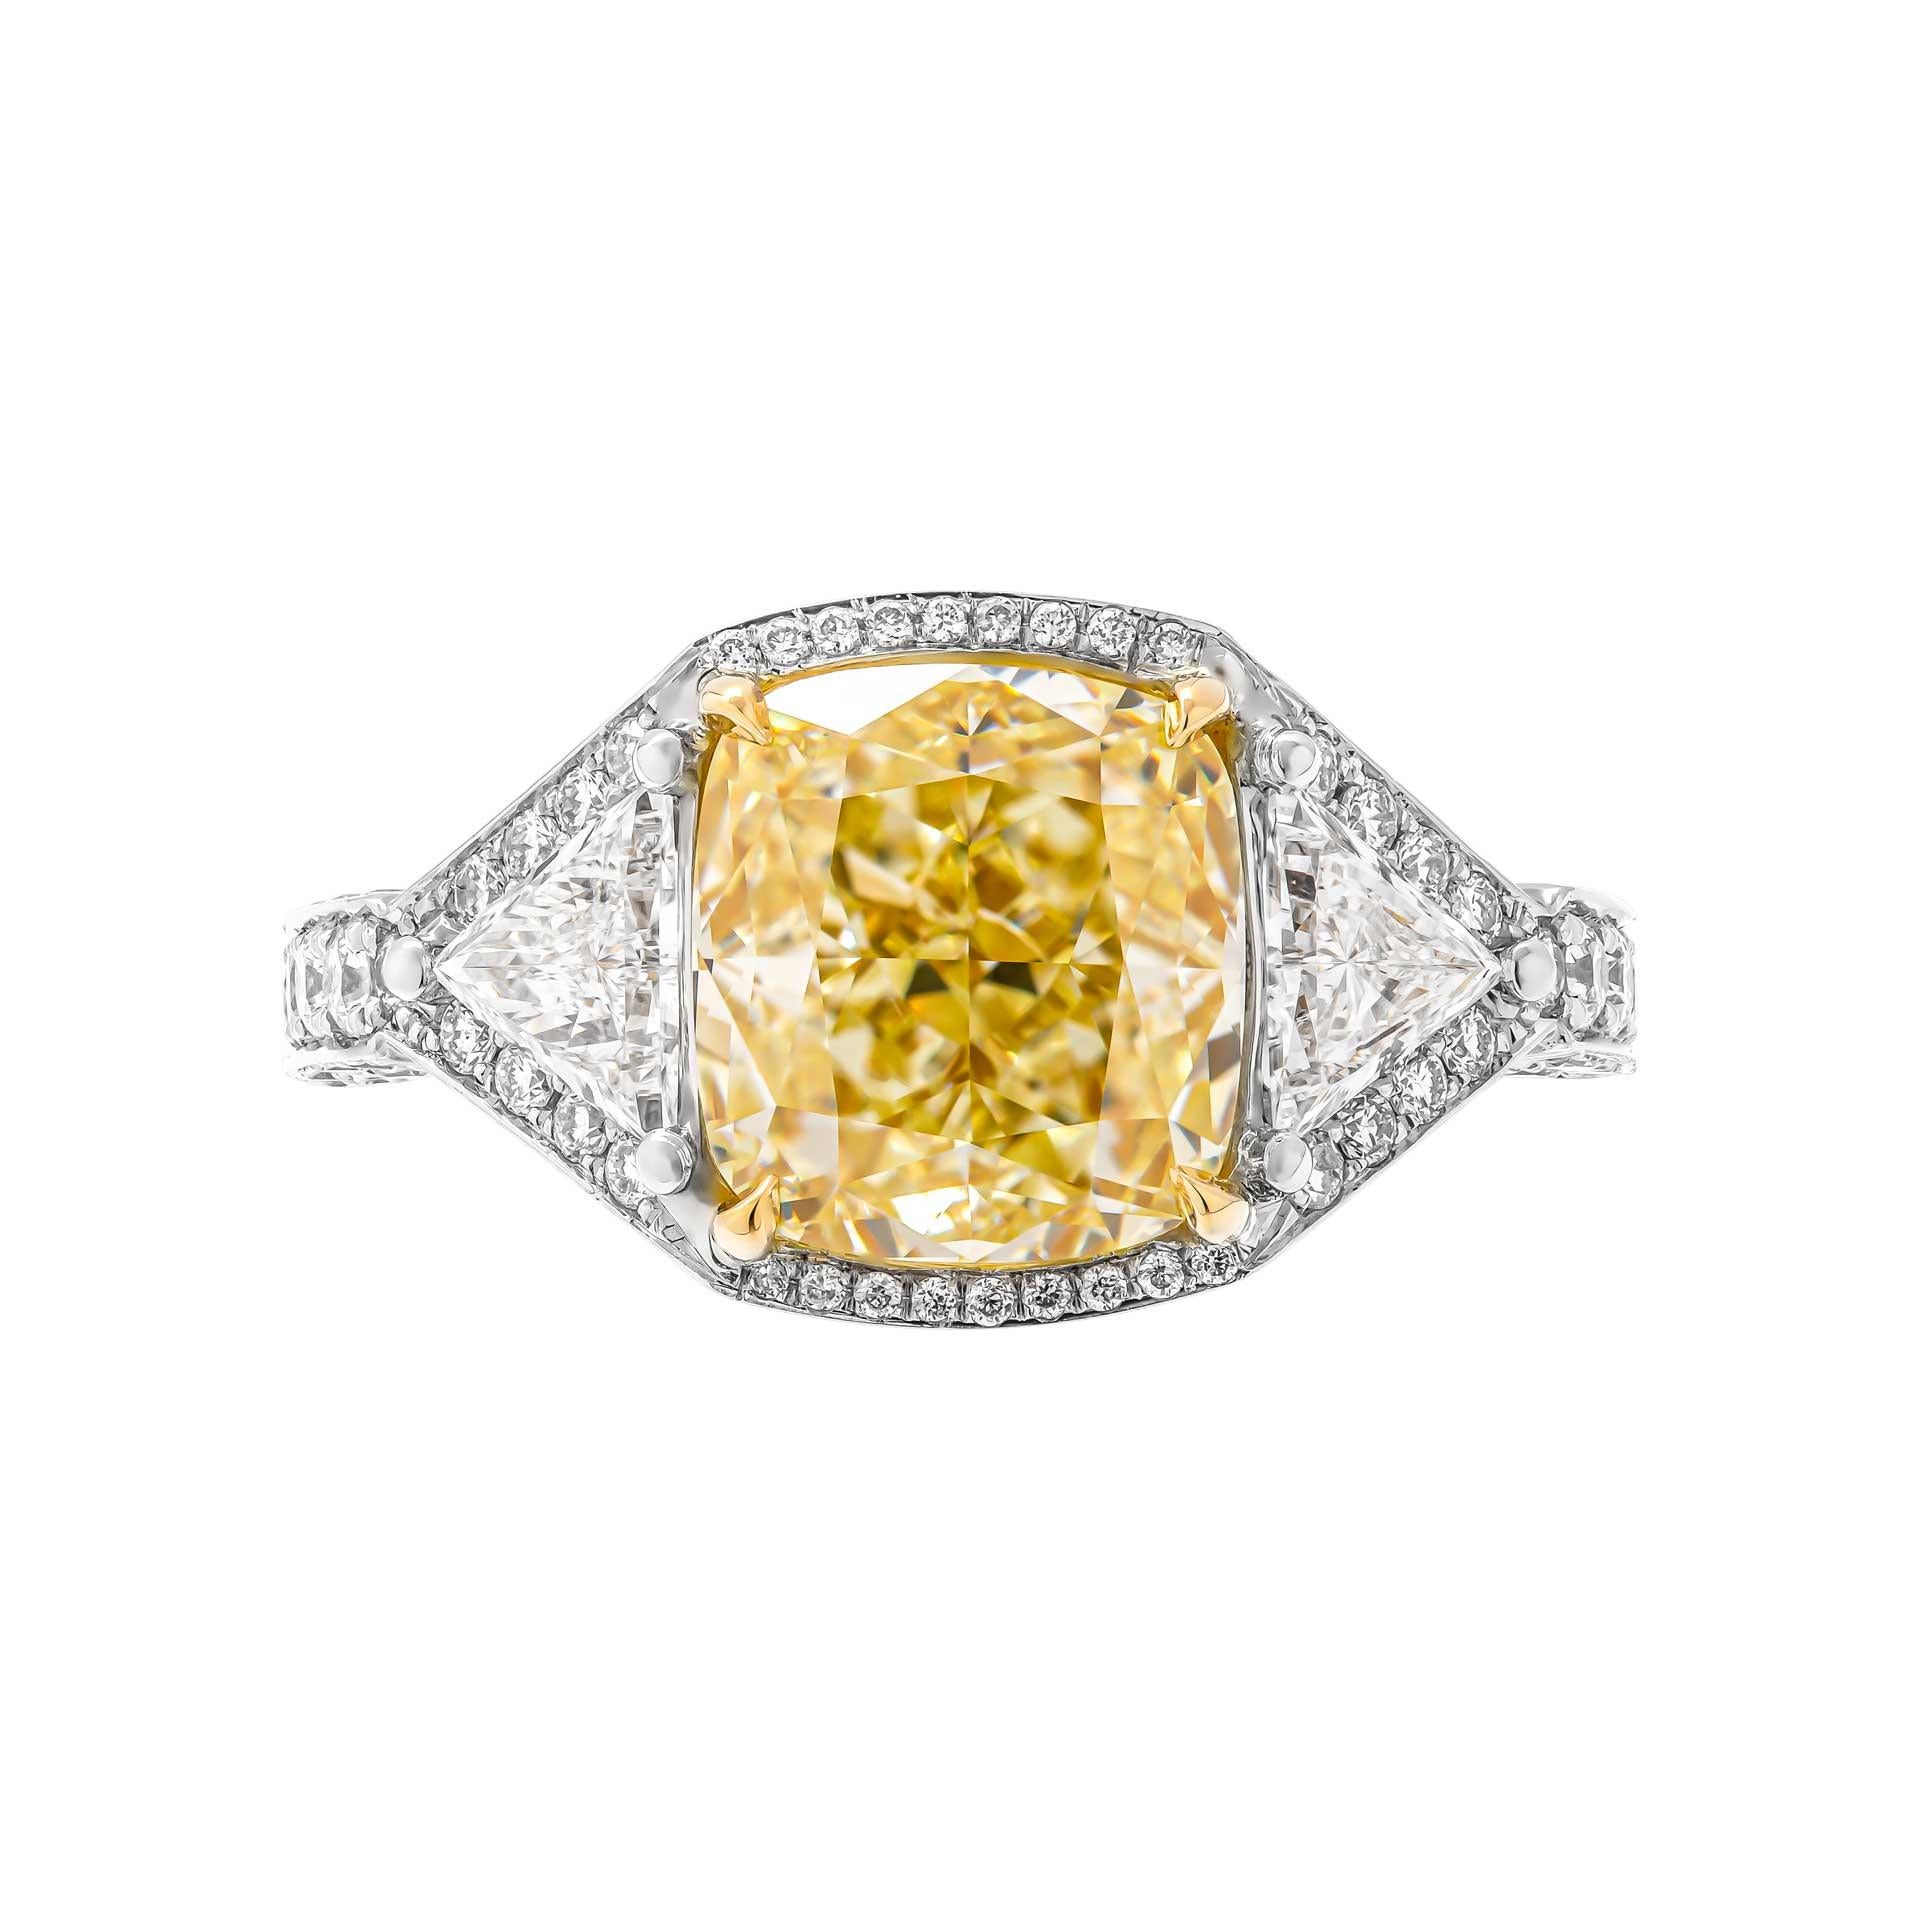 Mounted in handmade custom design setting featuring Platinum 950 & 18k Yellow Gold, 5 rows of diamonds on the shank and fancy diamond gallery under each stone, a true piece of art
Halo around each tone makes it appear larger and high end. Setting